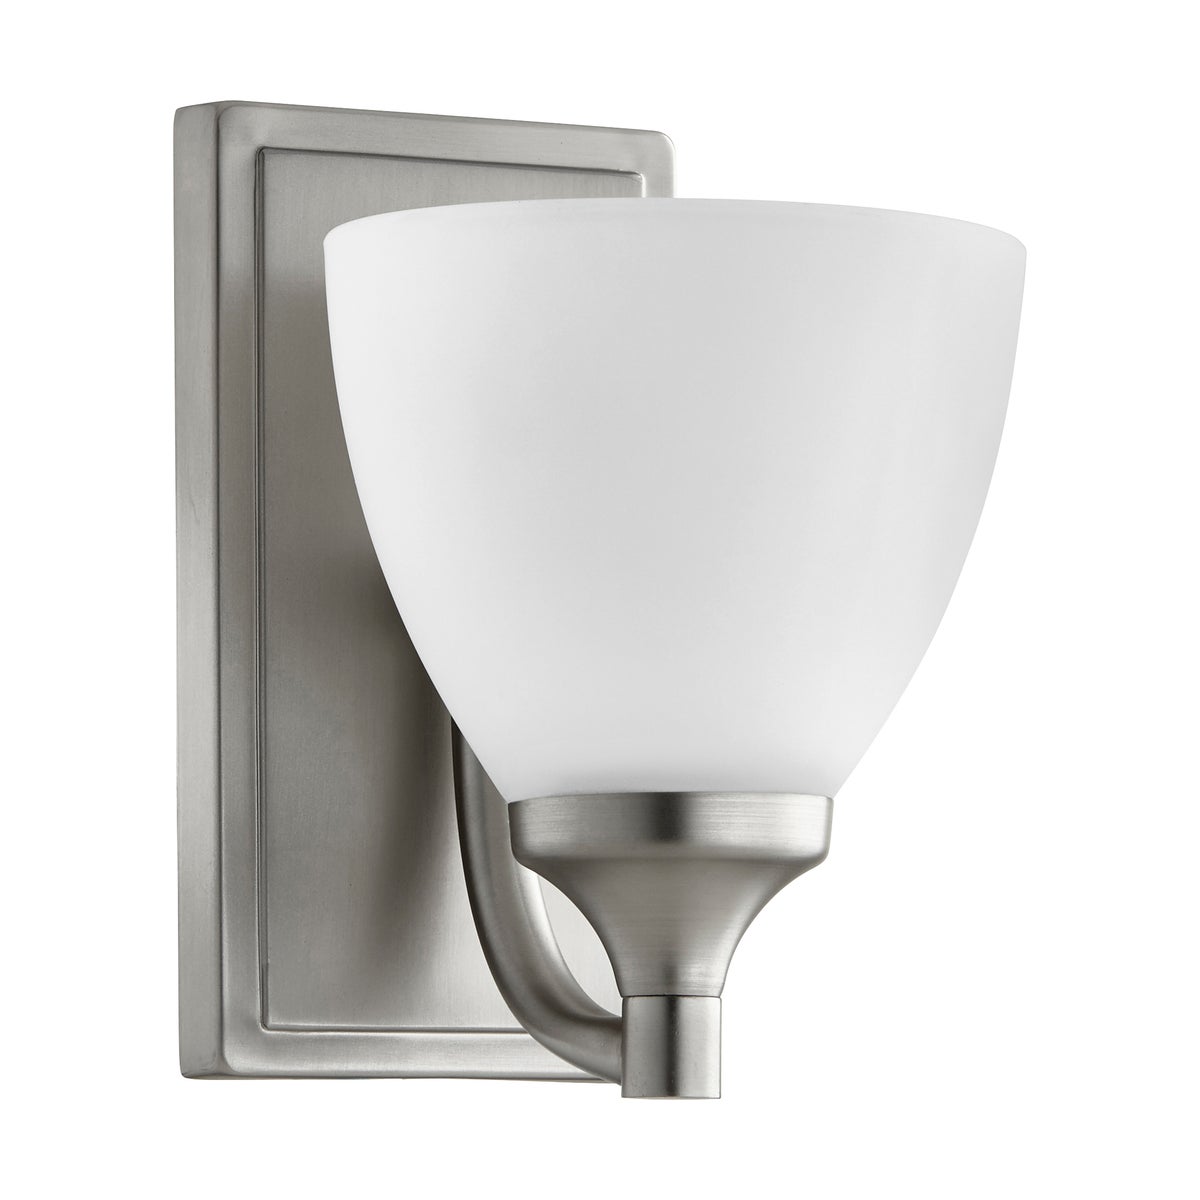 Enclave 1 Light Transitional Satin Nickel Wall Sconce